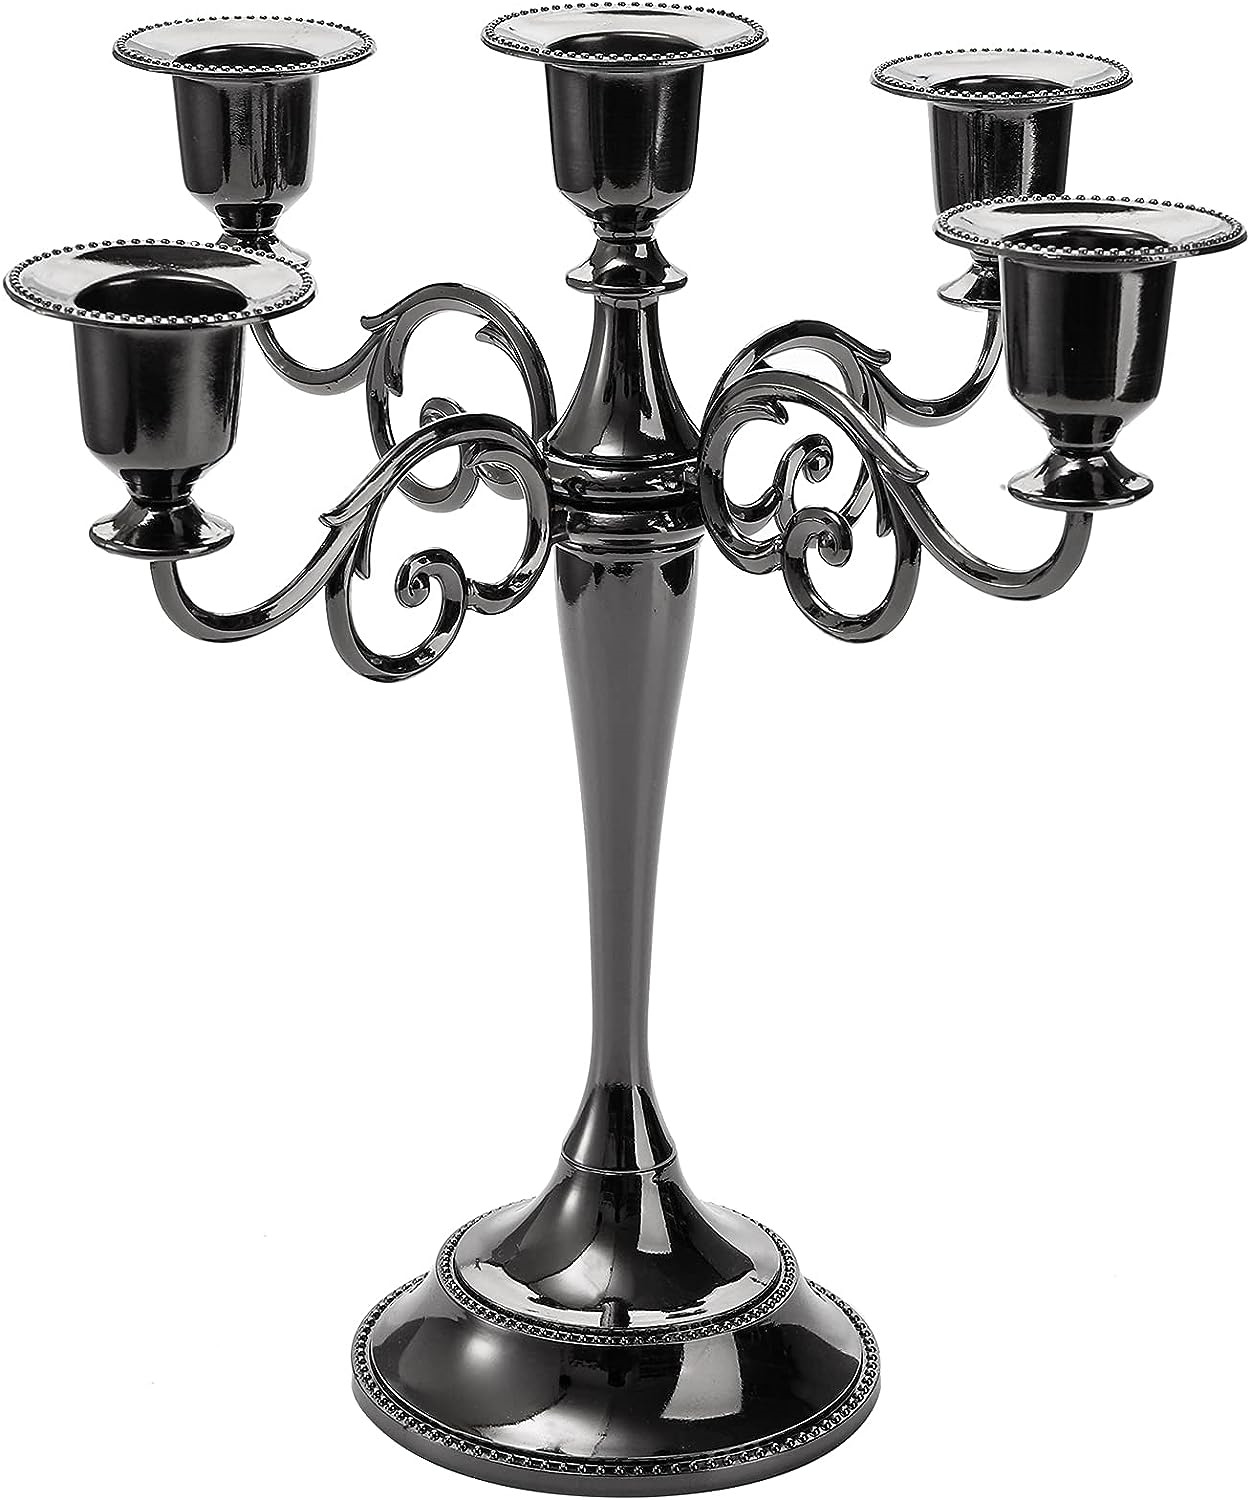 YOUEON 5 Arms Candelabra, 10.4 Inch Tall Black Candlestick Holder, Gothic Candle